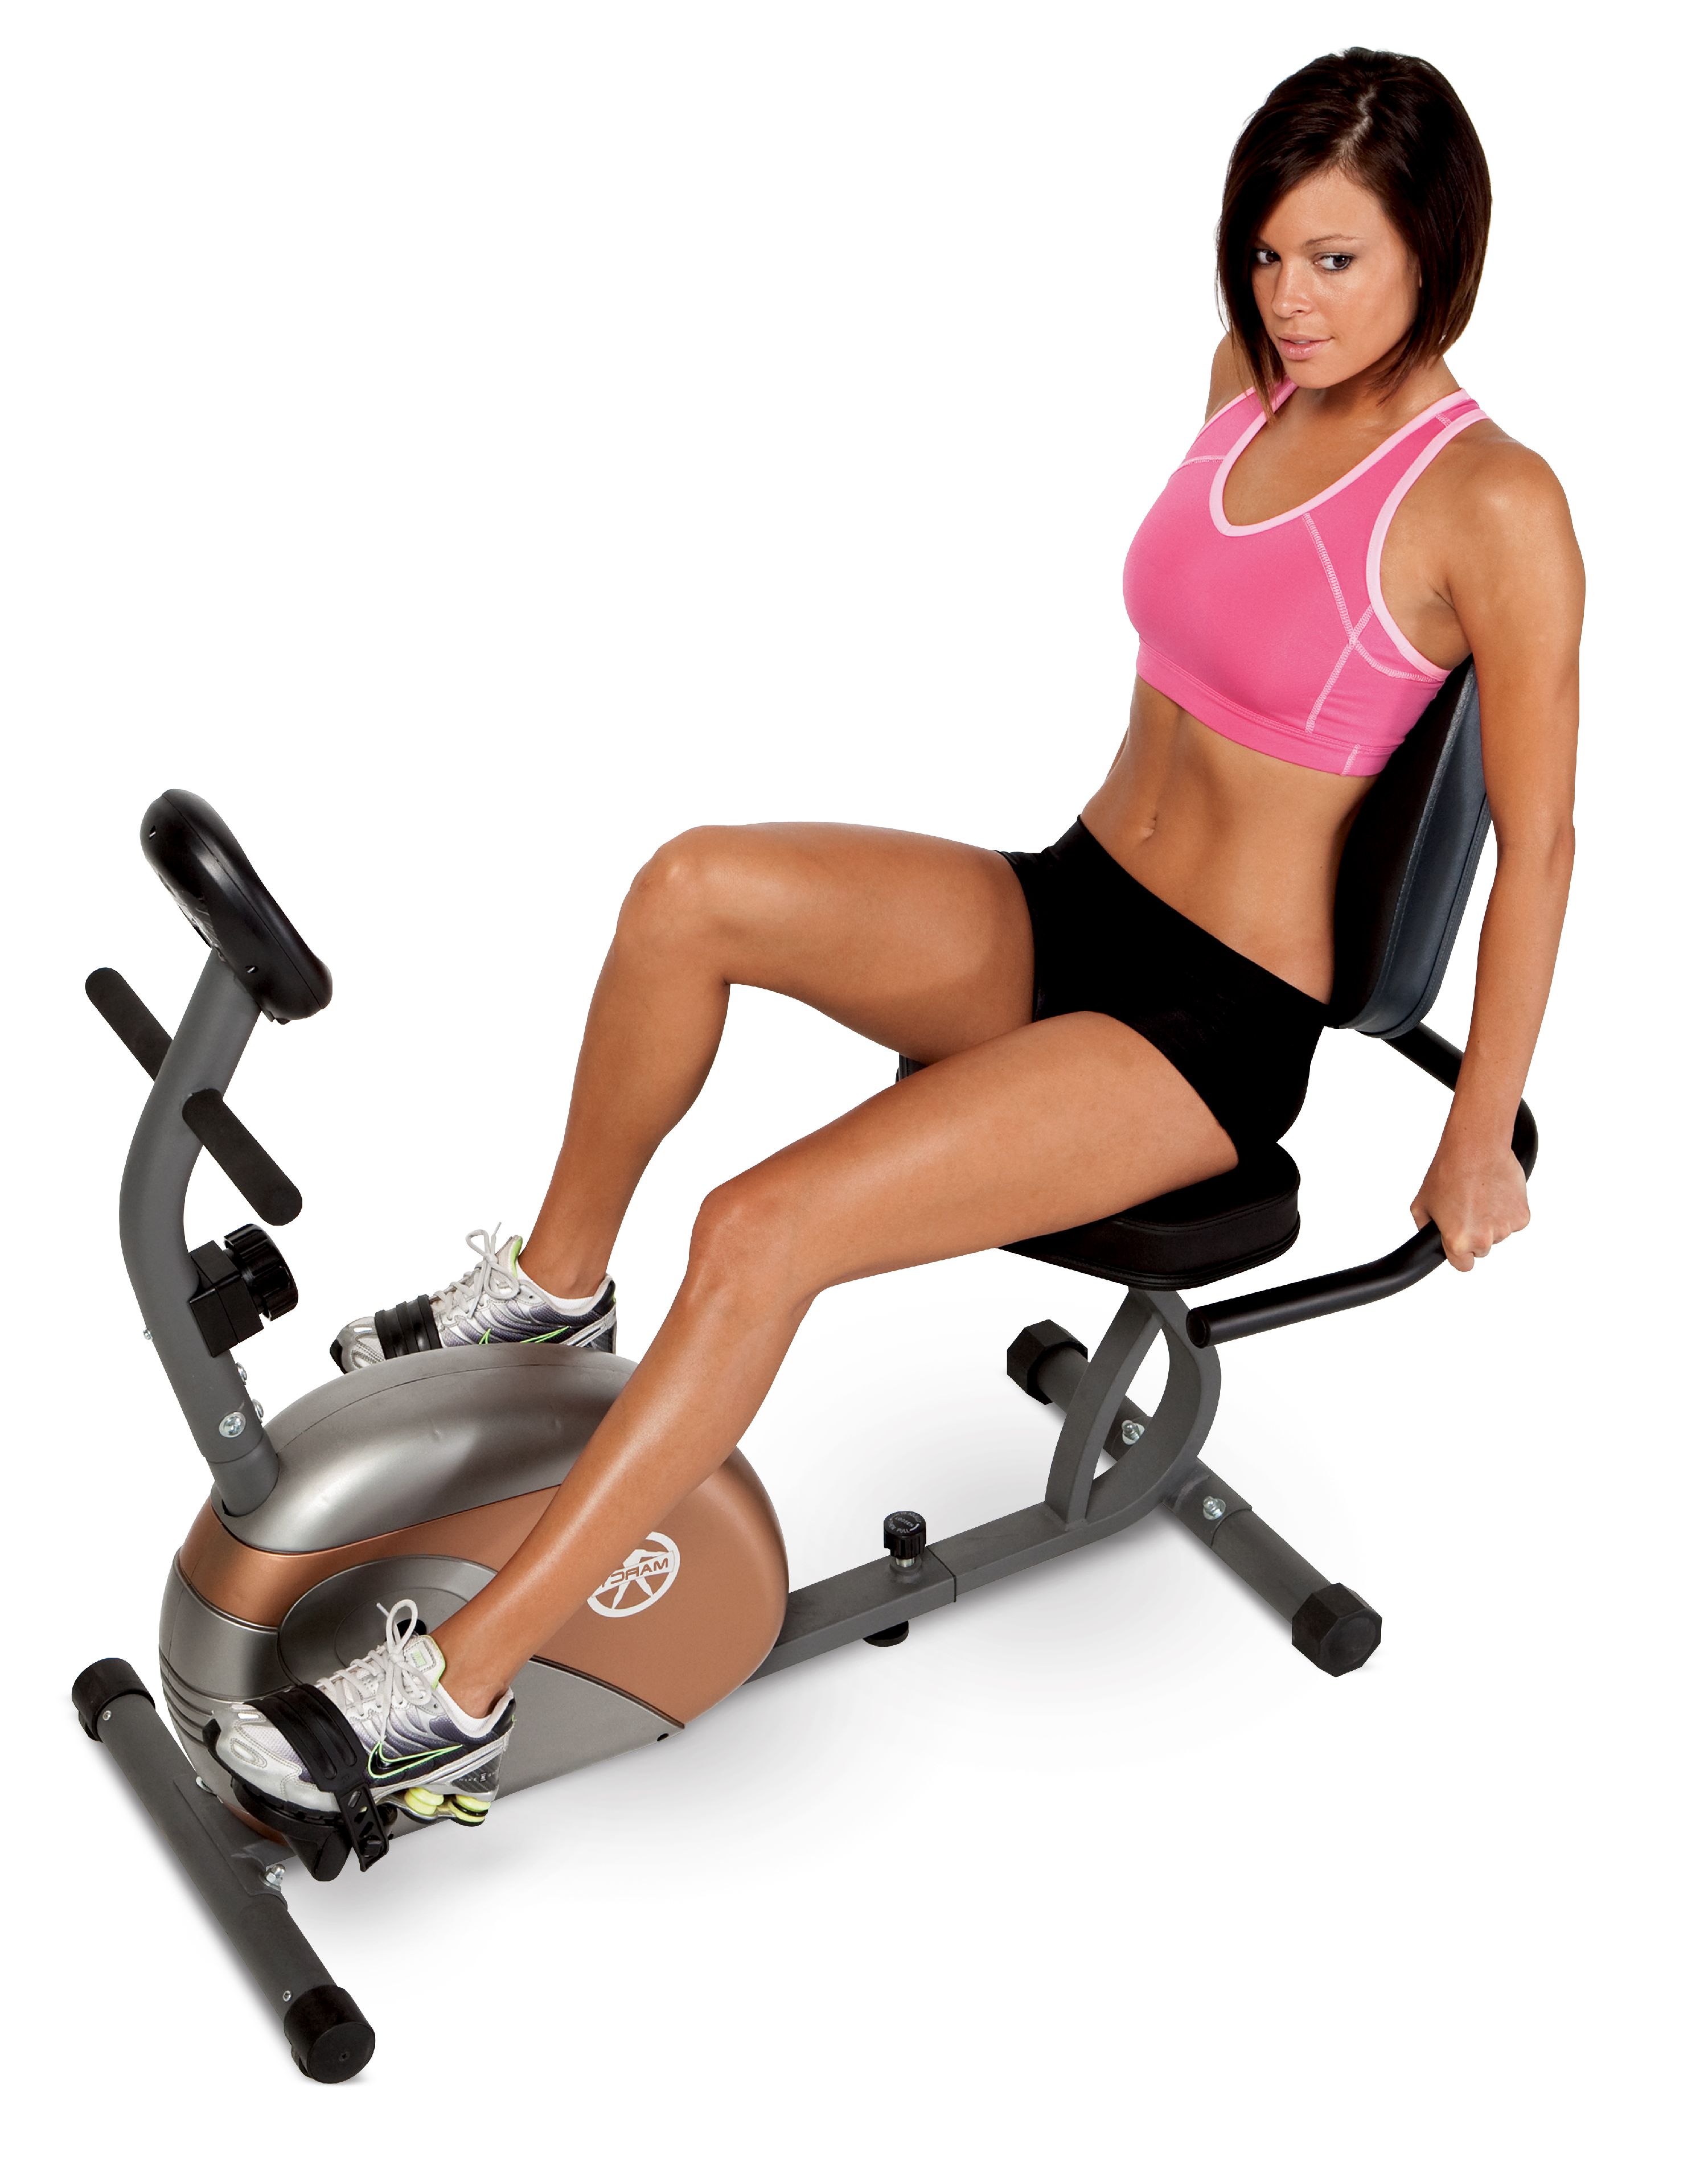 Marcy ME709 Recumbent Magnetic Exercise Bike Cycling Home Gym Equipment - image 4 of 5